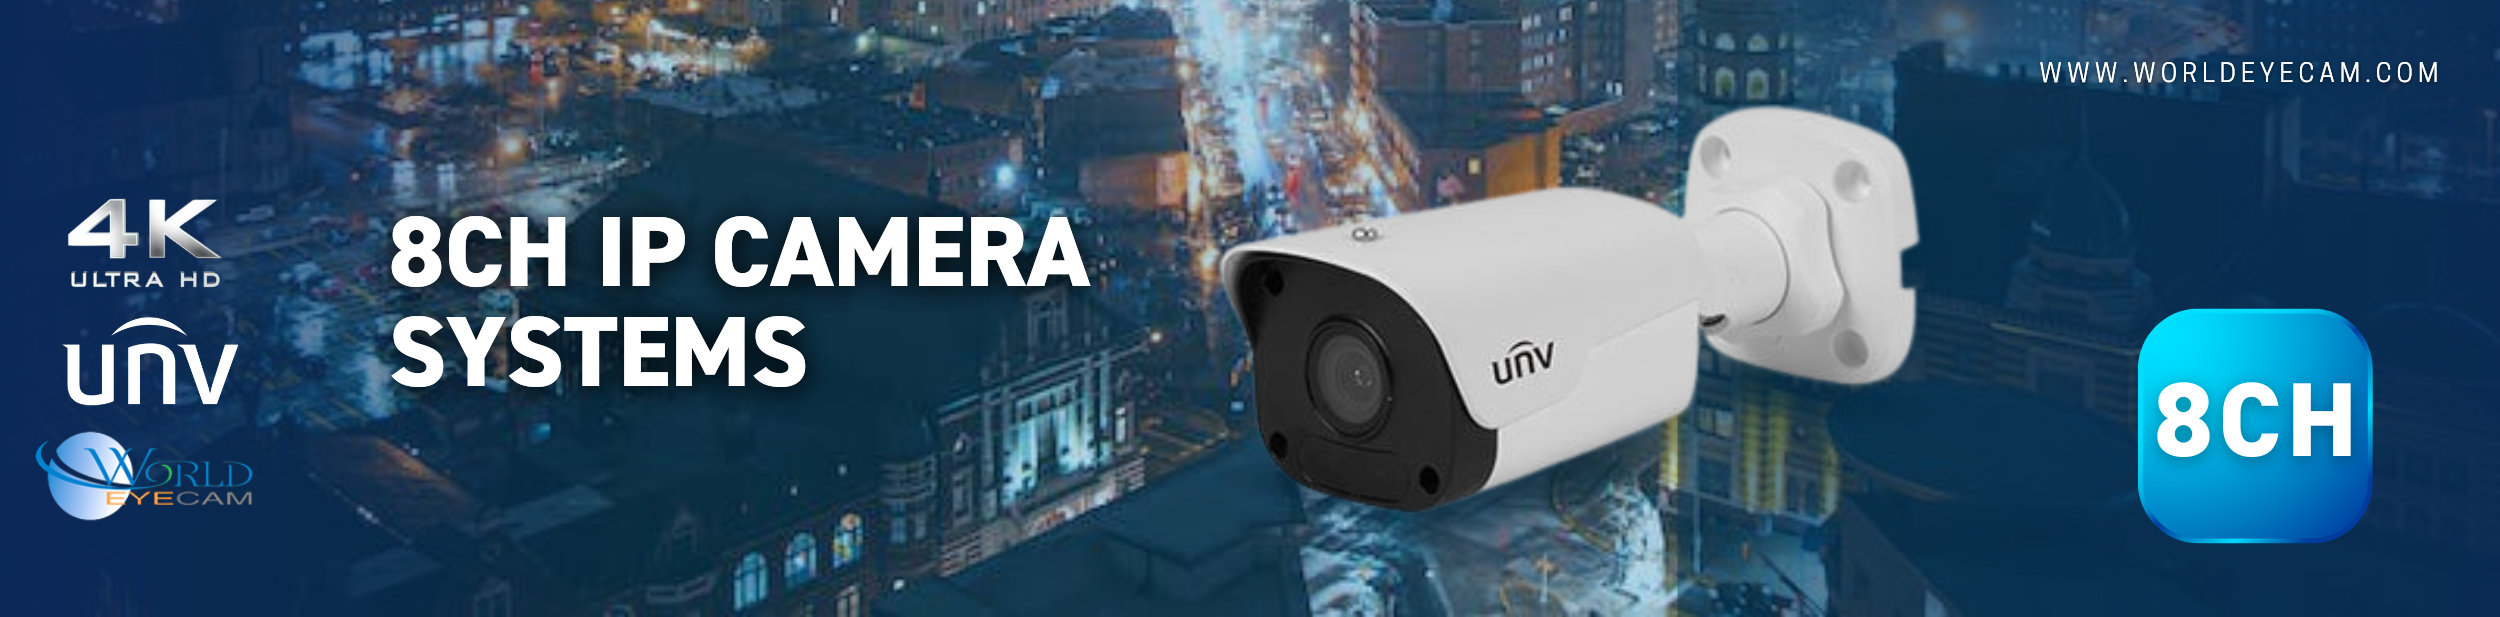 IP Camera Systems - 8ch Uniview